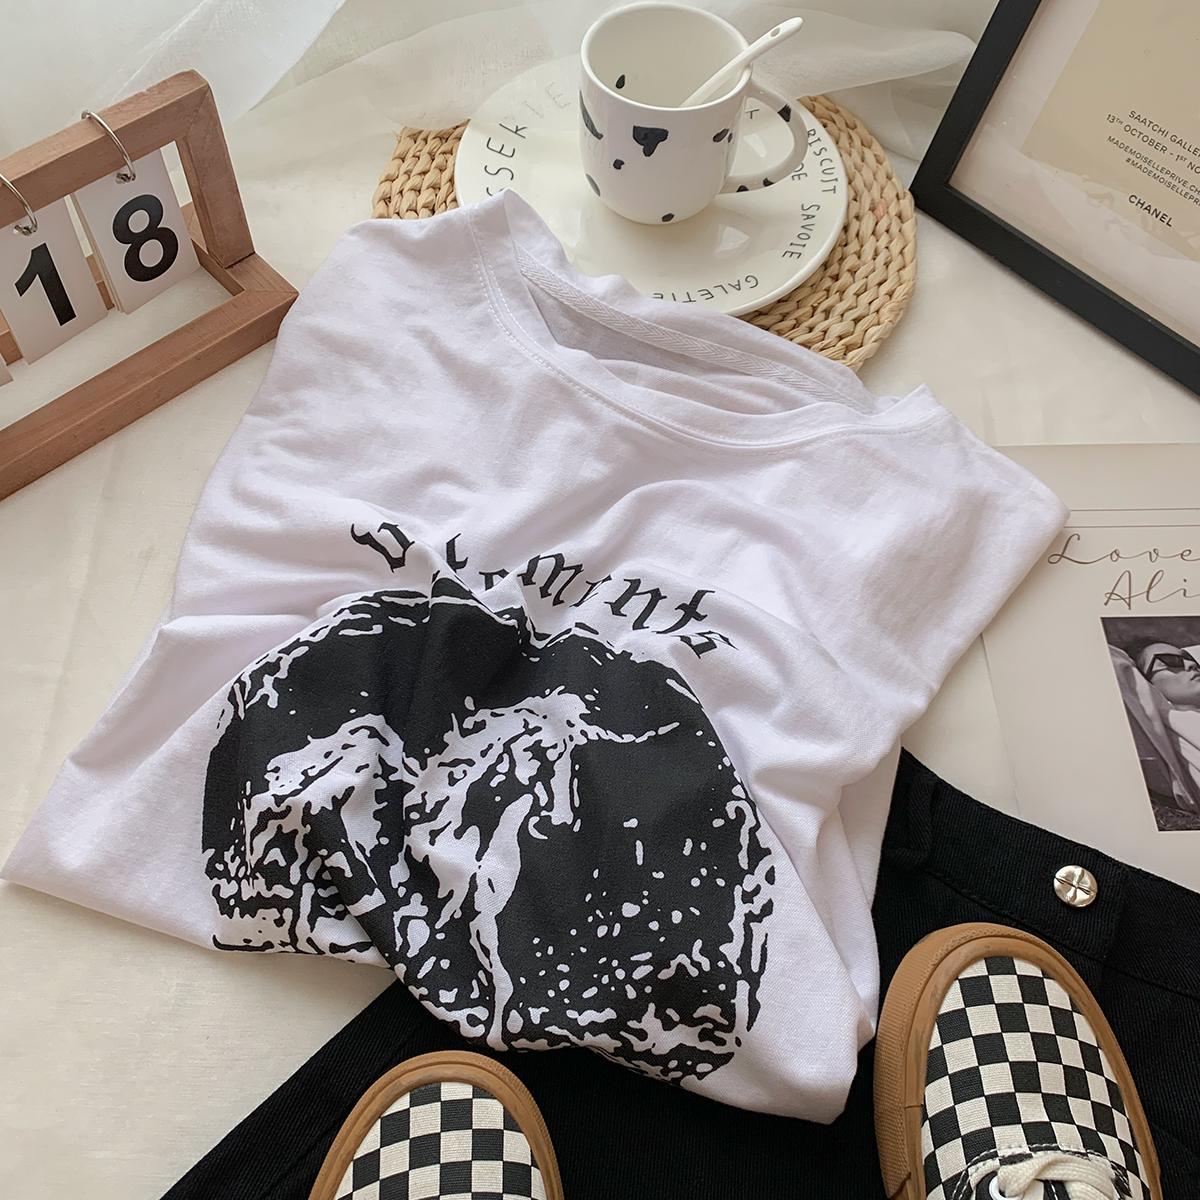 American half-sleeved silky breathable unicorn print short-sleeved T-shirt women's summer loose lazy bottom missing top